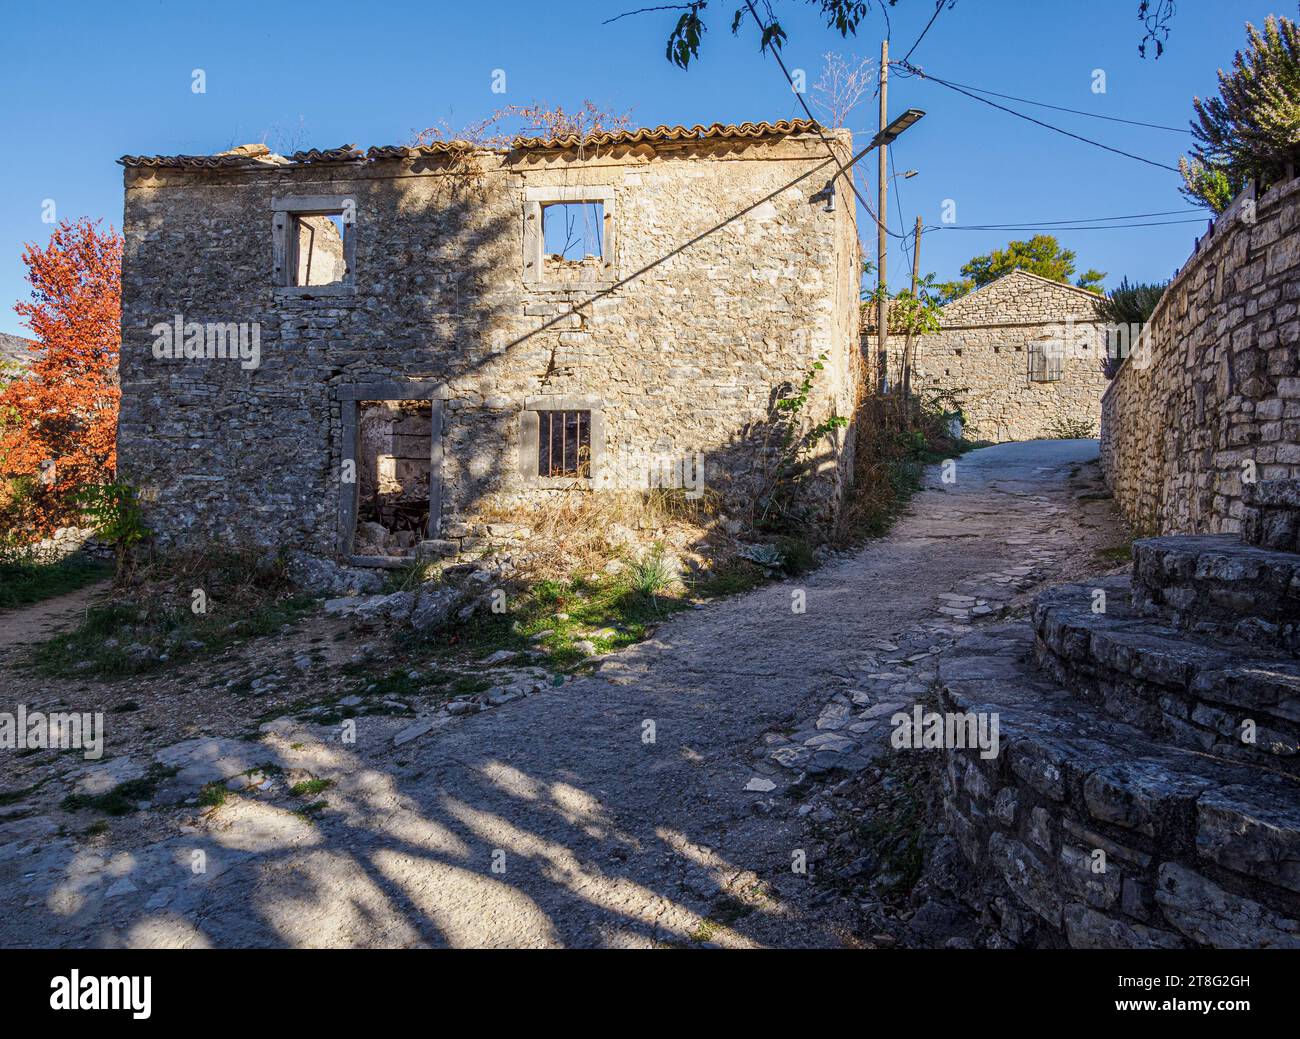 Ruined building in the partially abandoned village of Old Perithia (Palea Peritheia) on the high slopes of Mt Pandokratoras in Corfu Greece Stock Photo